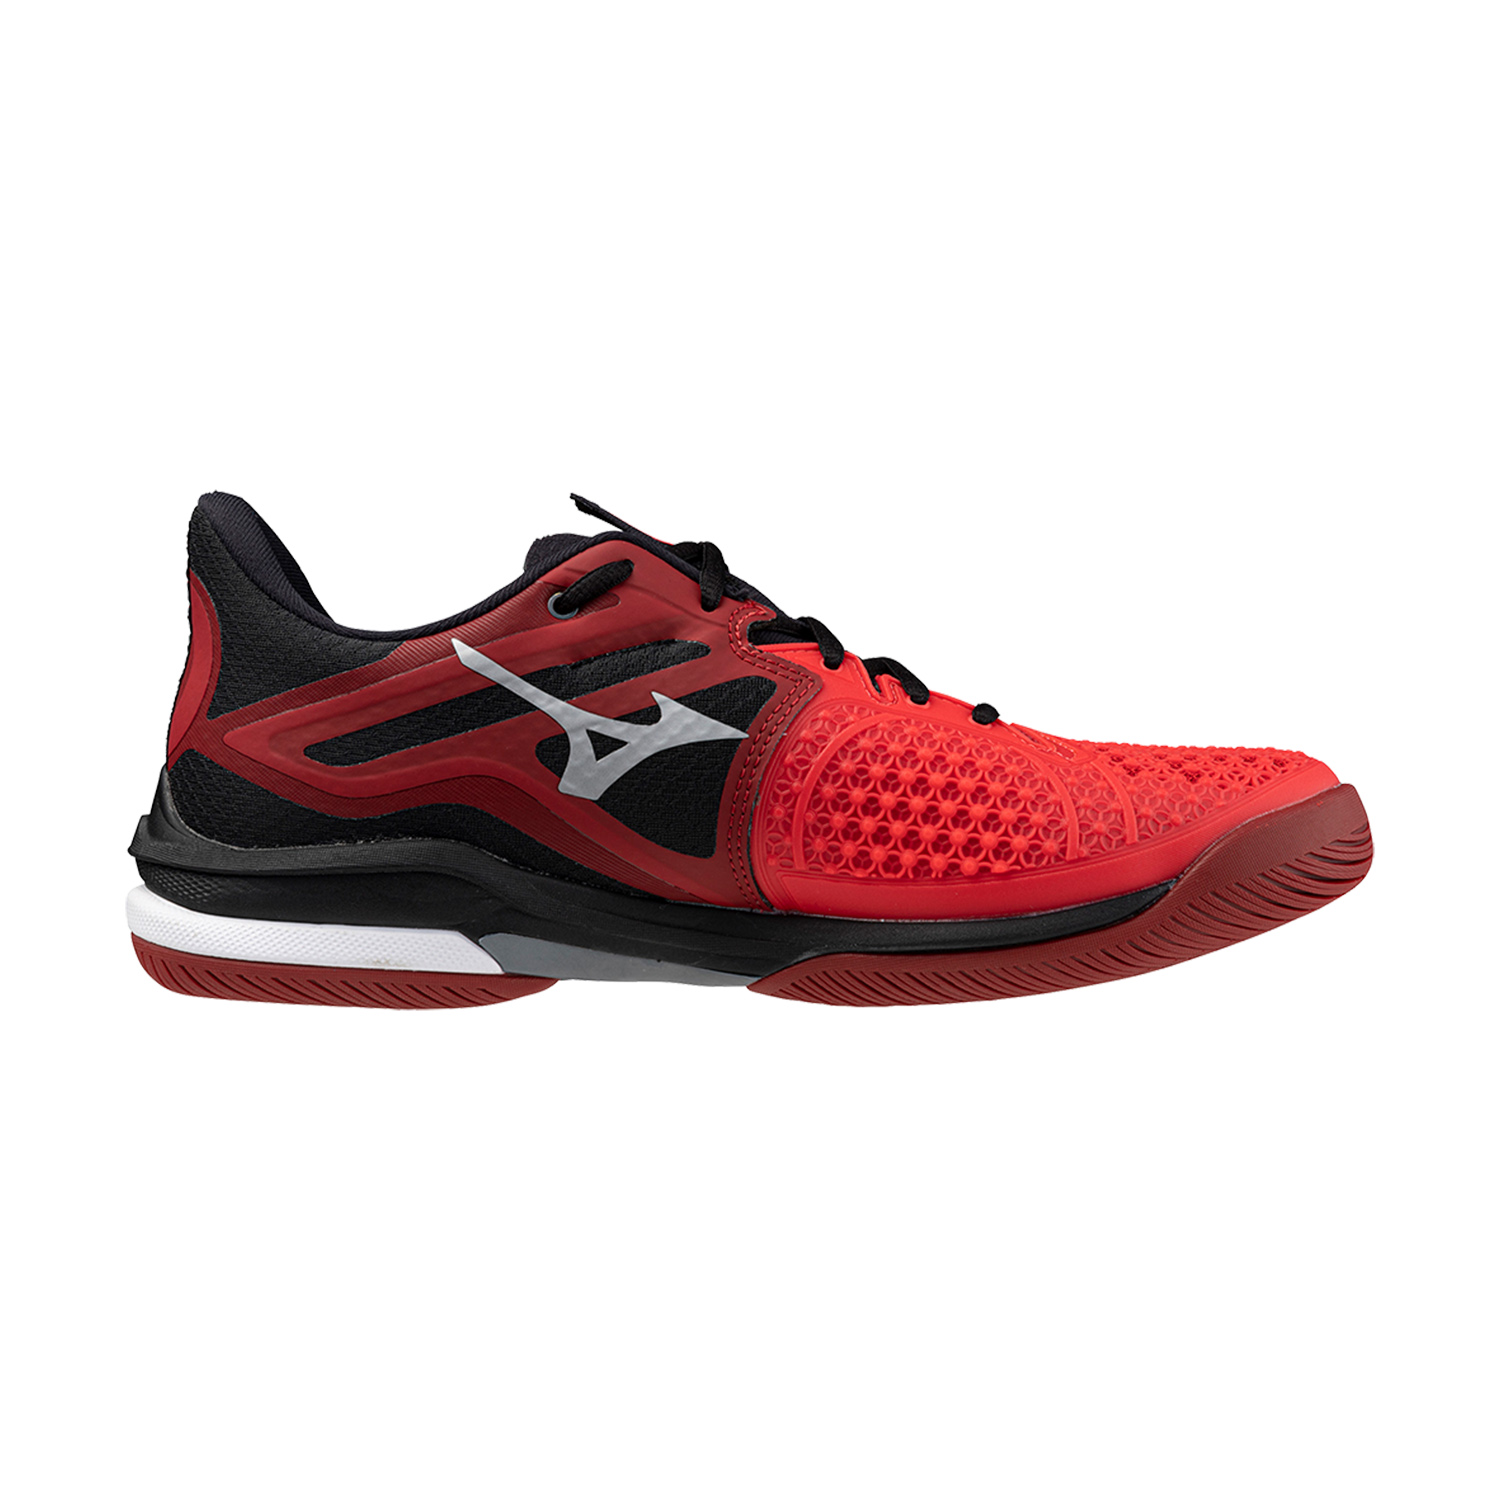 Mizuno Wave Exceed Tour 6 All Court - Radiant Red/White/Black